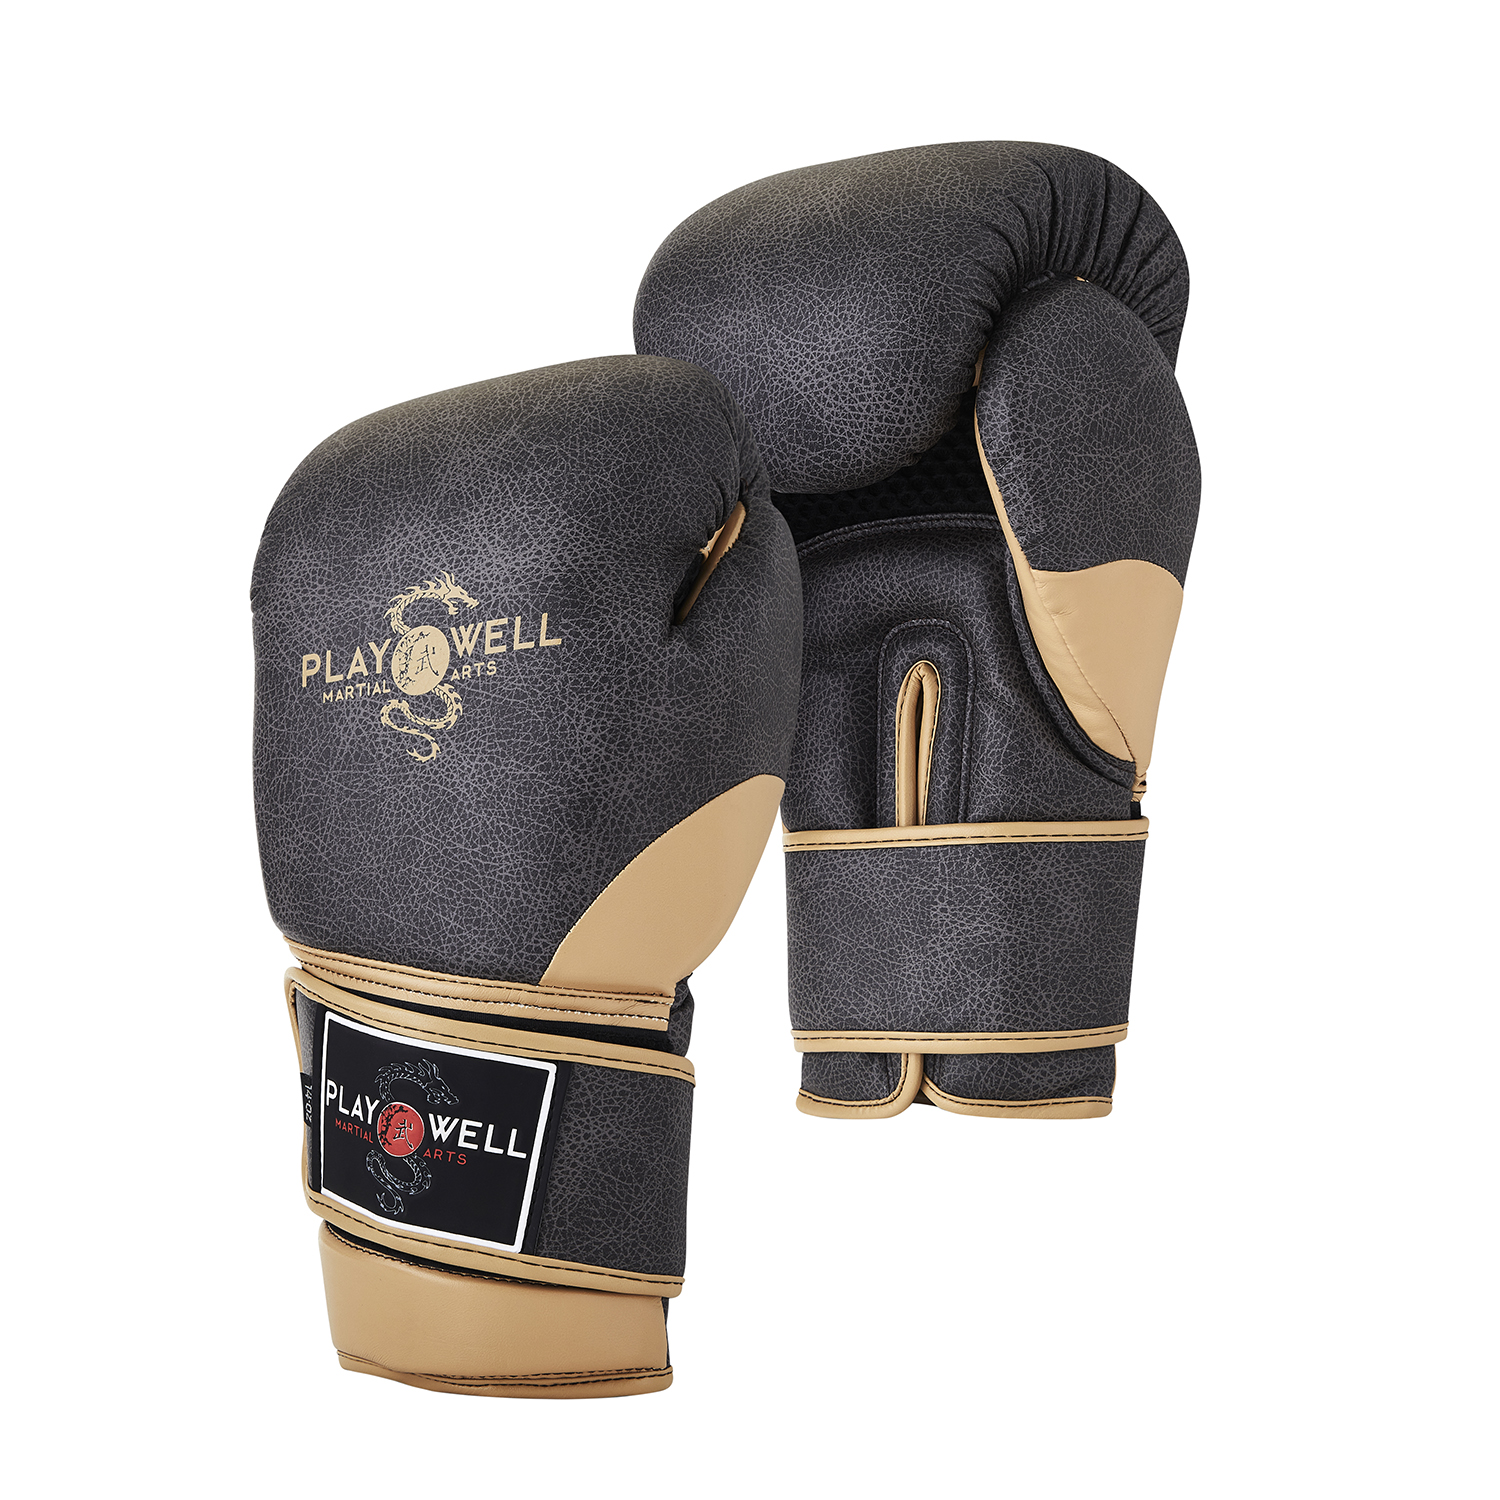 Playwell Premium "Vintage Series" Boxing Sparring Gloves - Click Image to Close